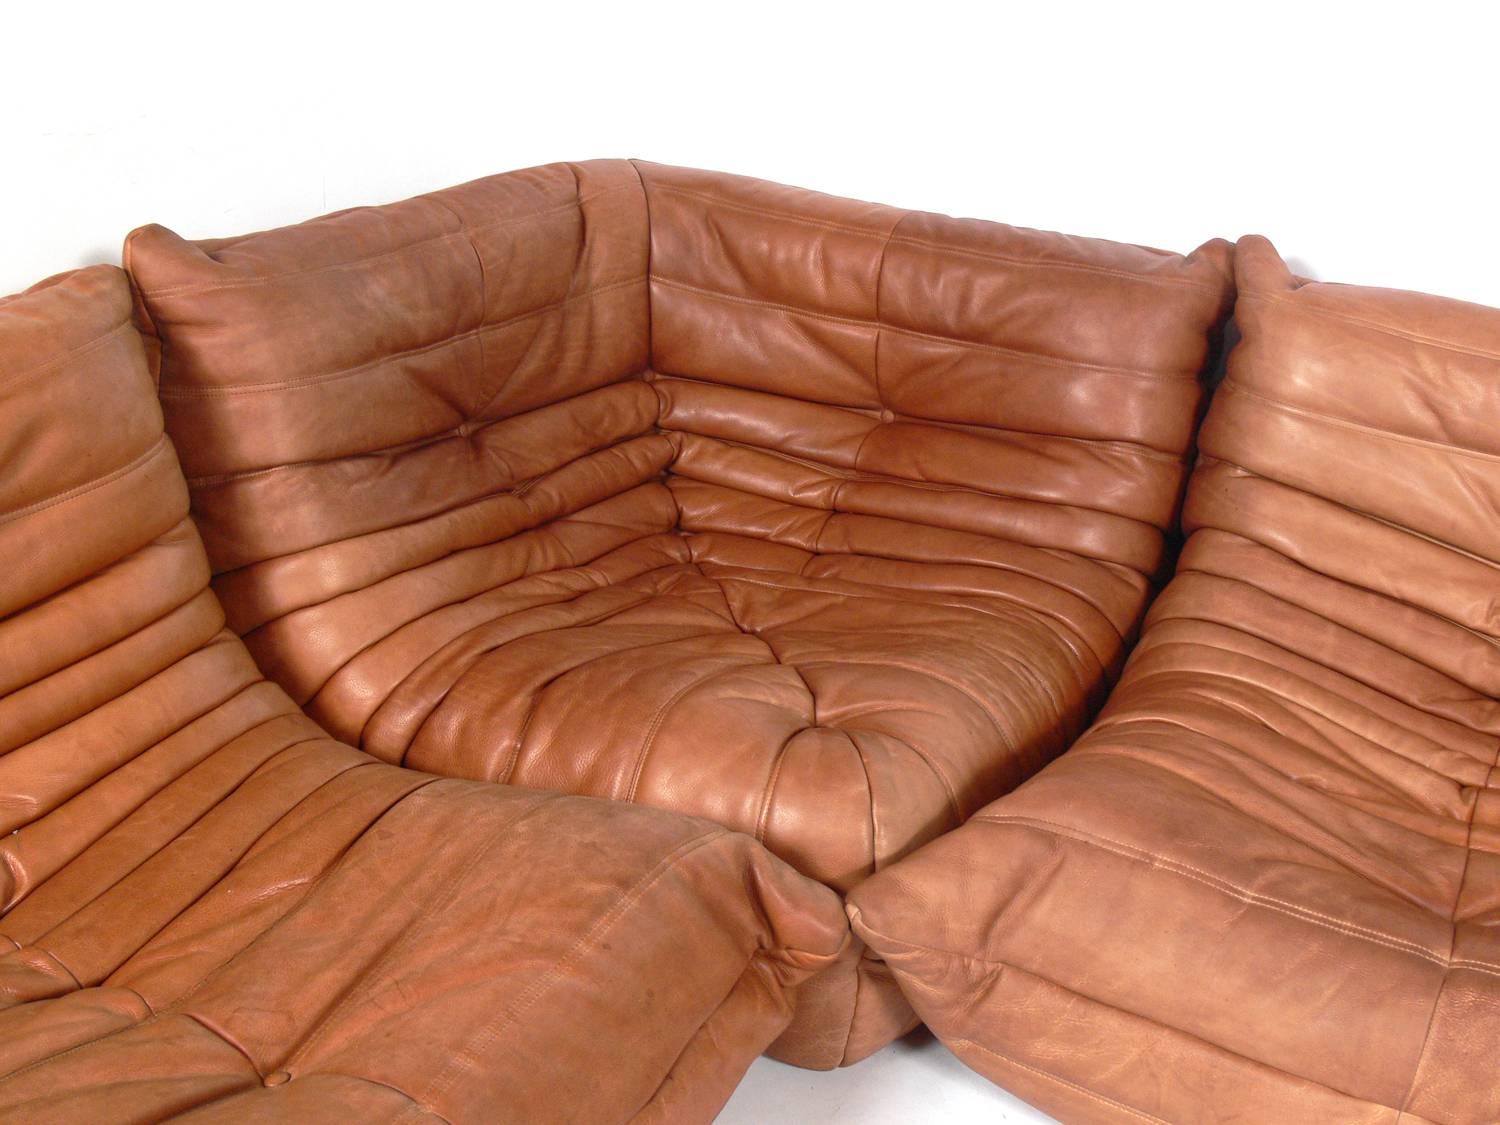 Late 20th Century Sculptural Leather Togo Sofa by Michel Ducaroy for Ligne Roset